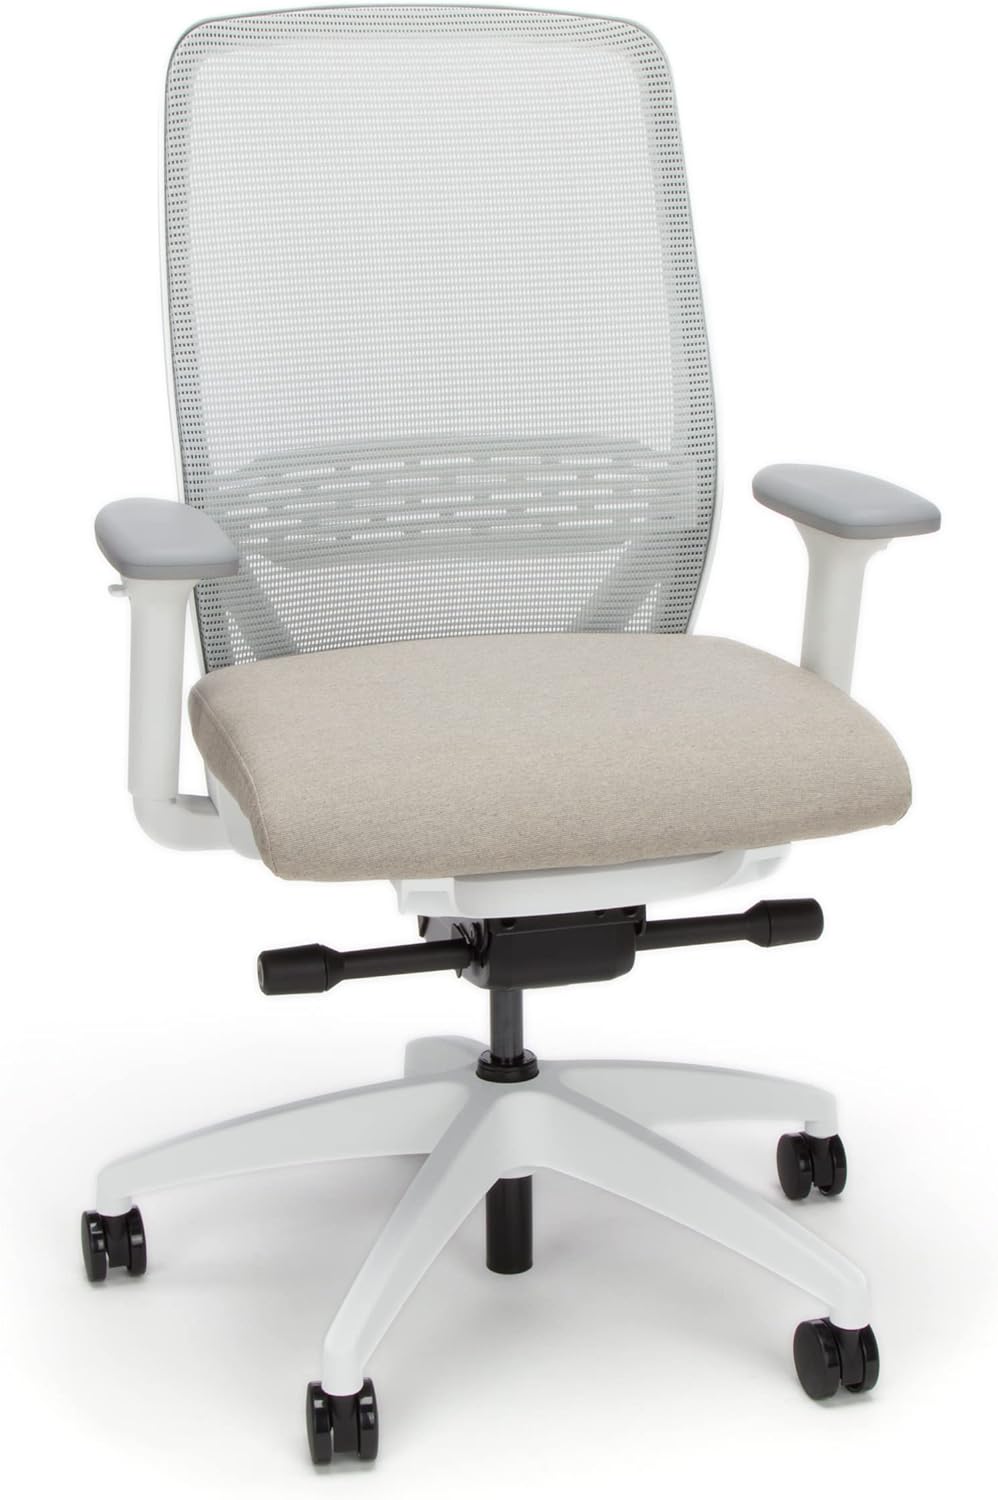 HON Nucleus Recharged White Office Chair Ergonomic Suspended Seat Mesh Back Computer Desk Chair for Home Office, Task Work - Synchro-Tilt Recline, Swivel Wheels, Adjustable Lumbar Support & Armrests